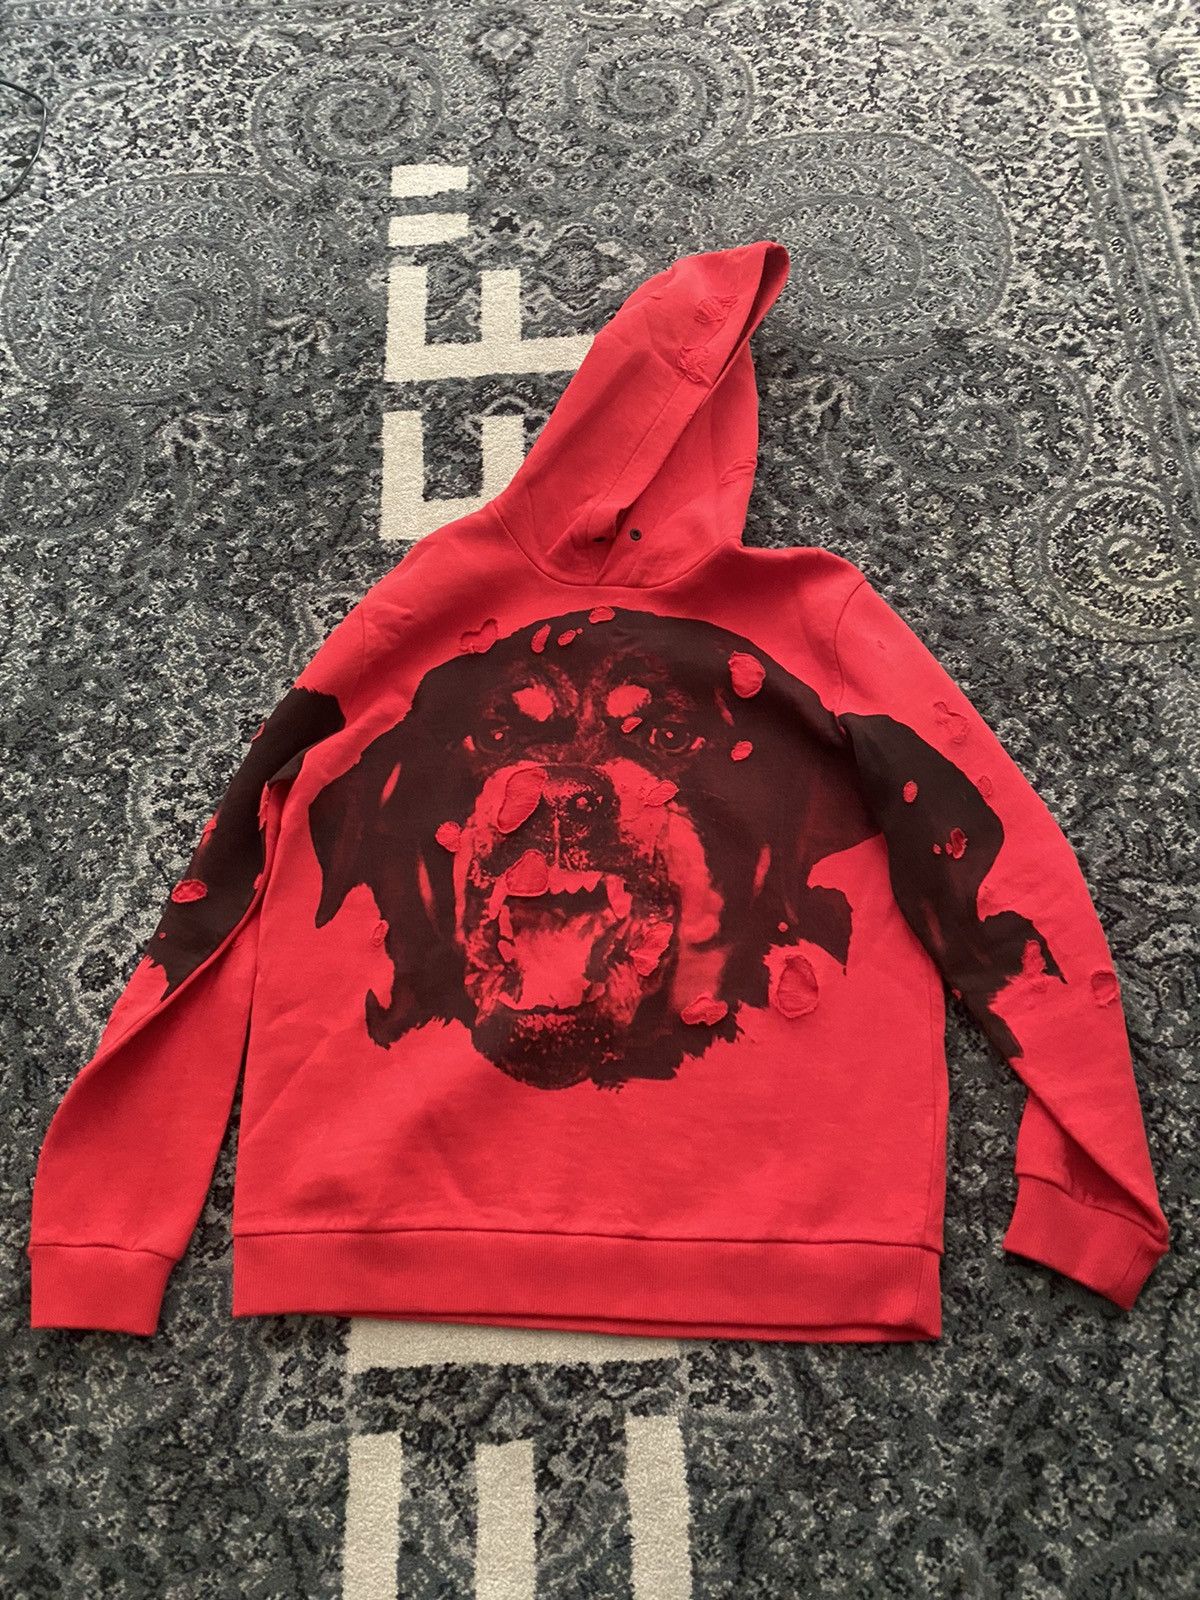 Givenchy Red Destroyed Rottweiler Hoodie | Grailed